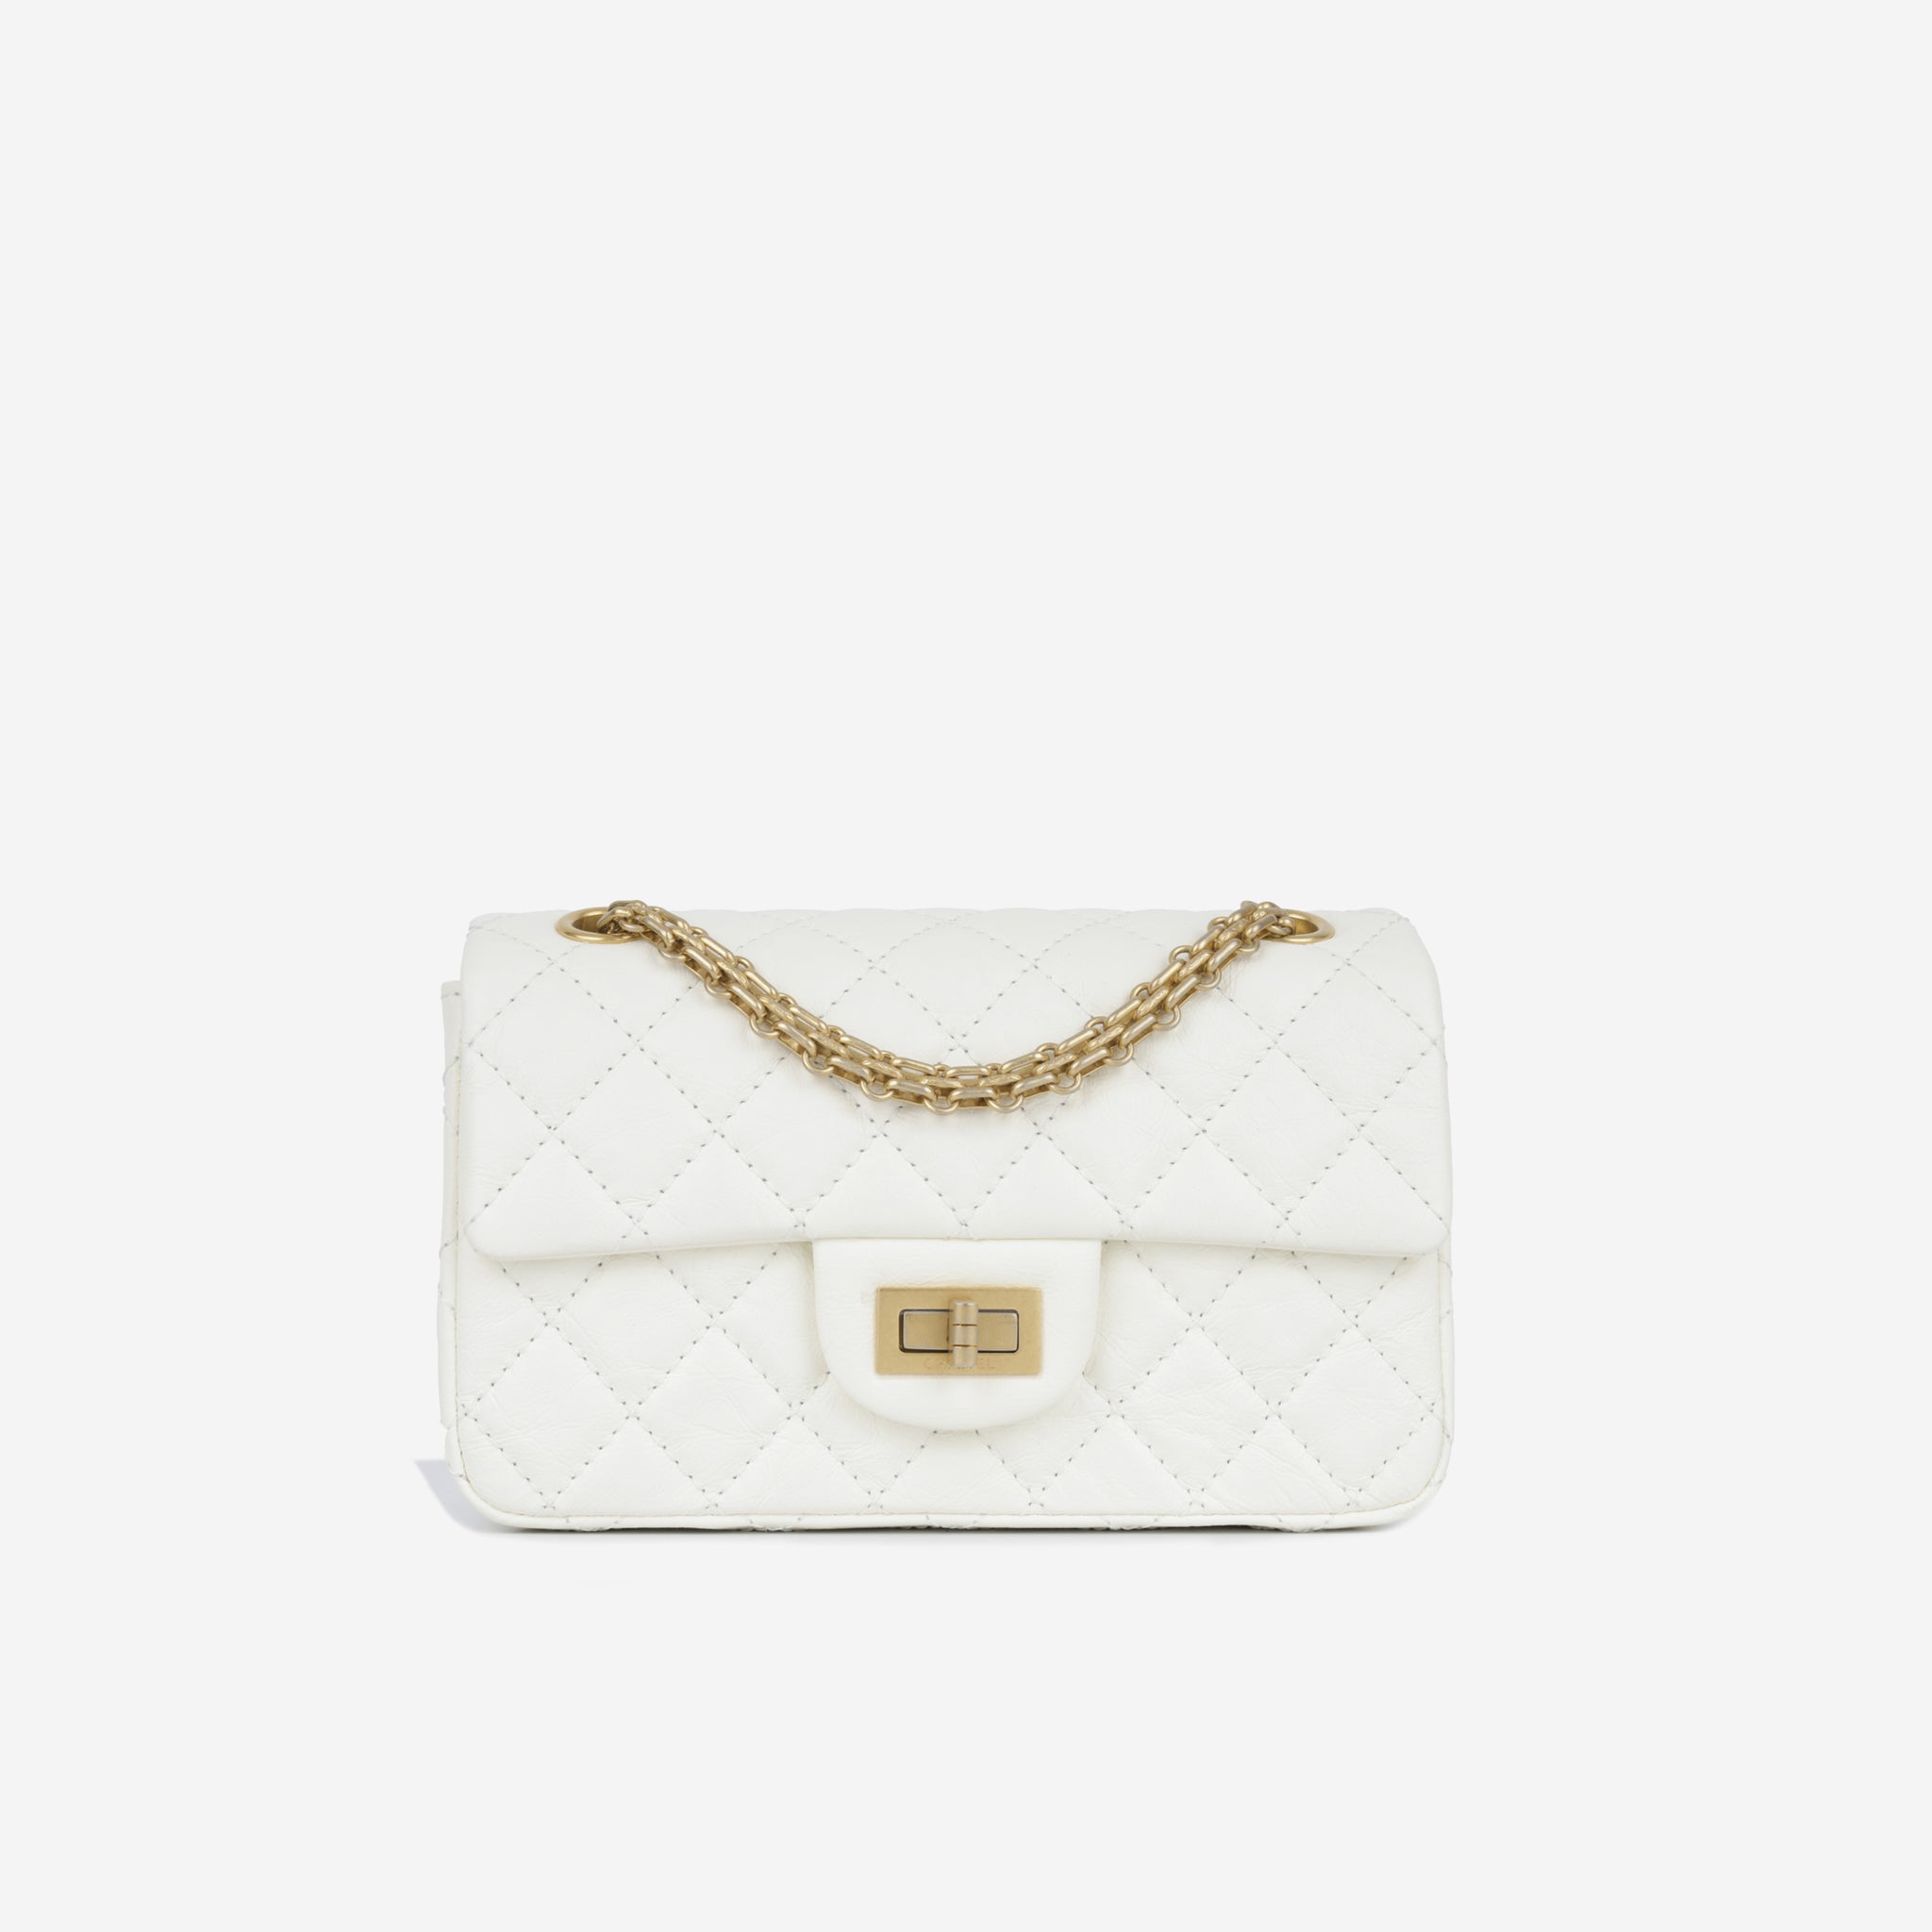 Chanel 2.55 - everything you need to know before buying the flap bag